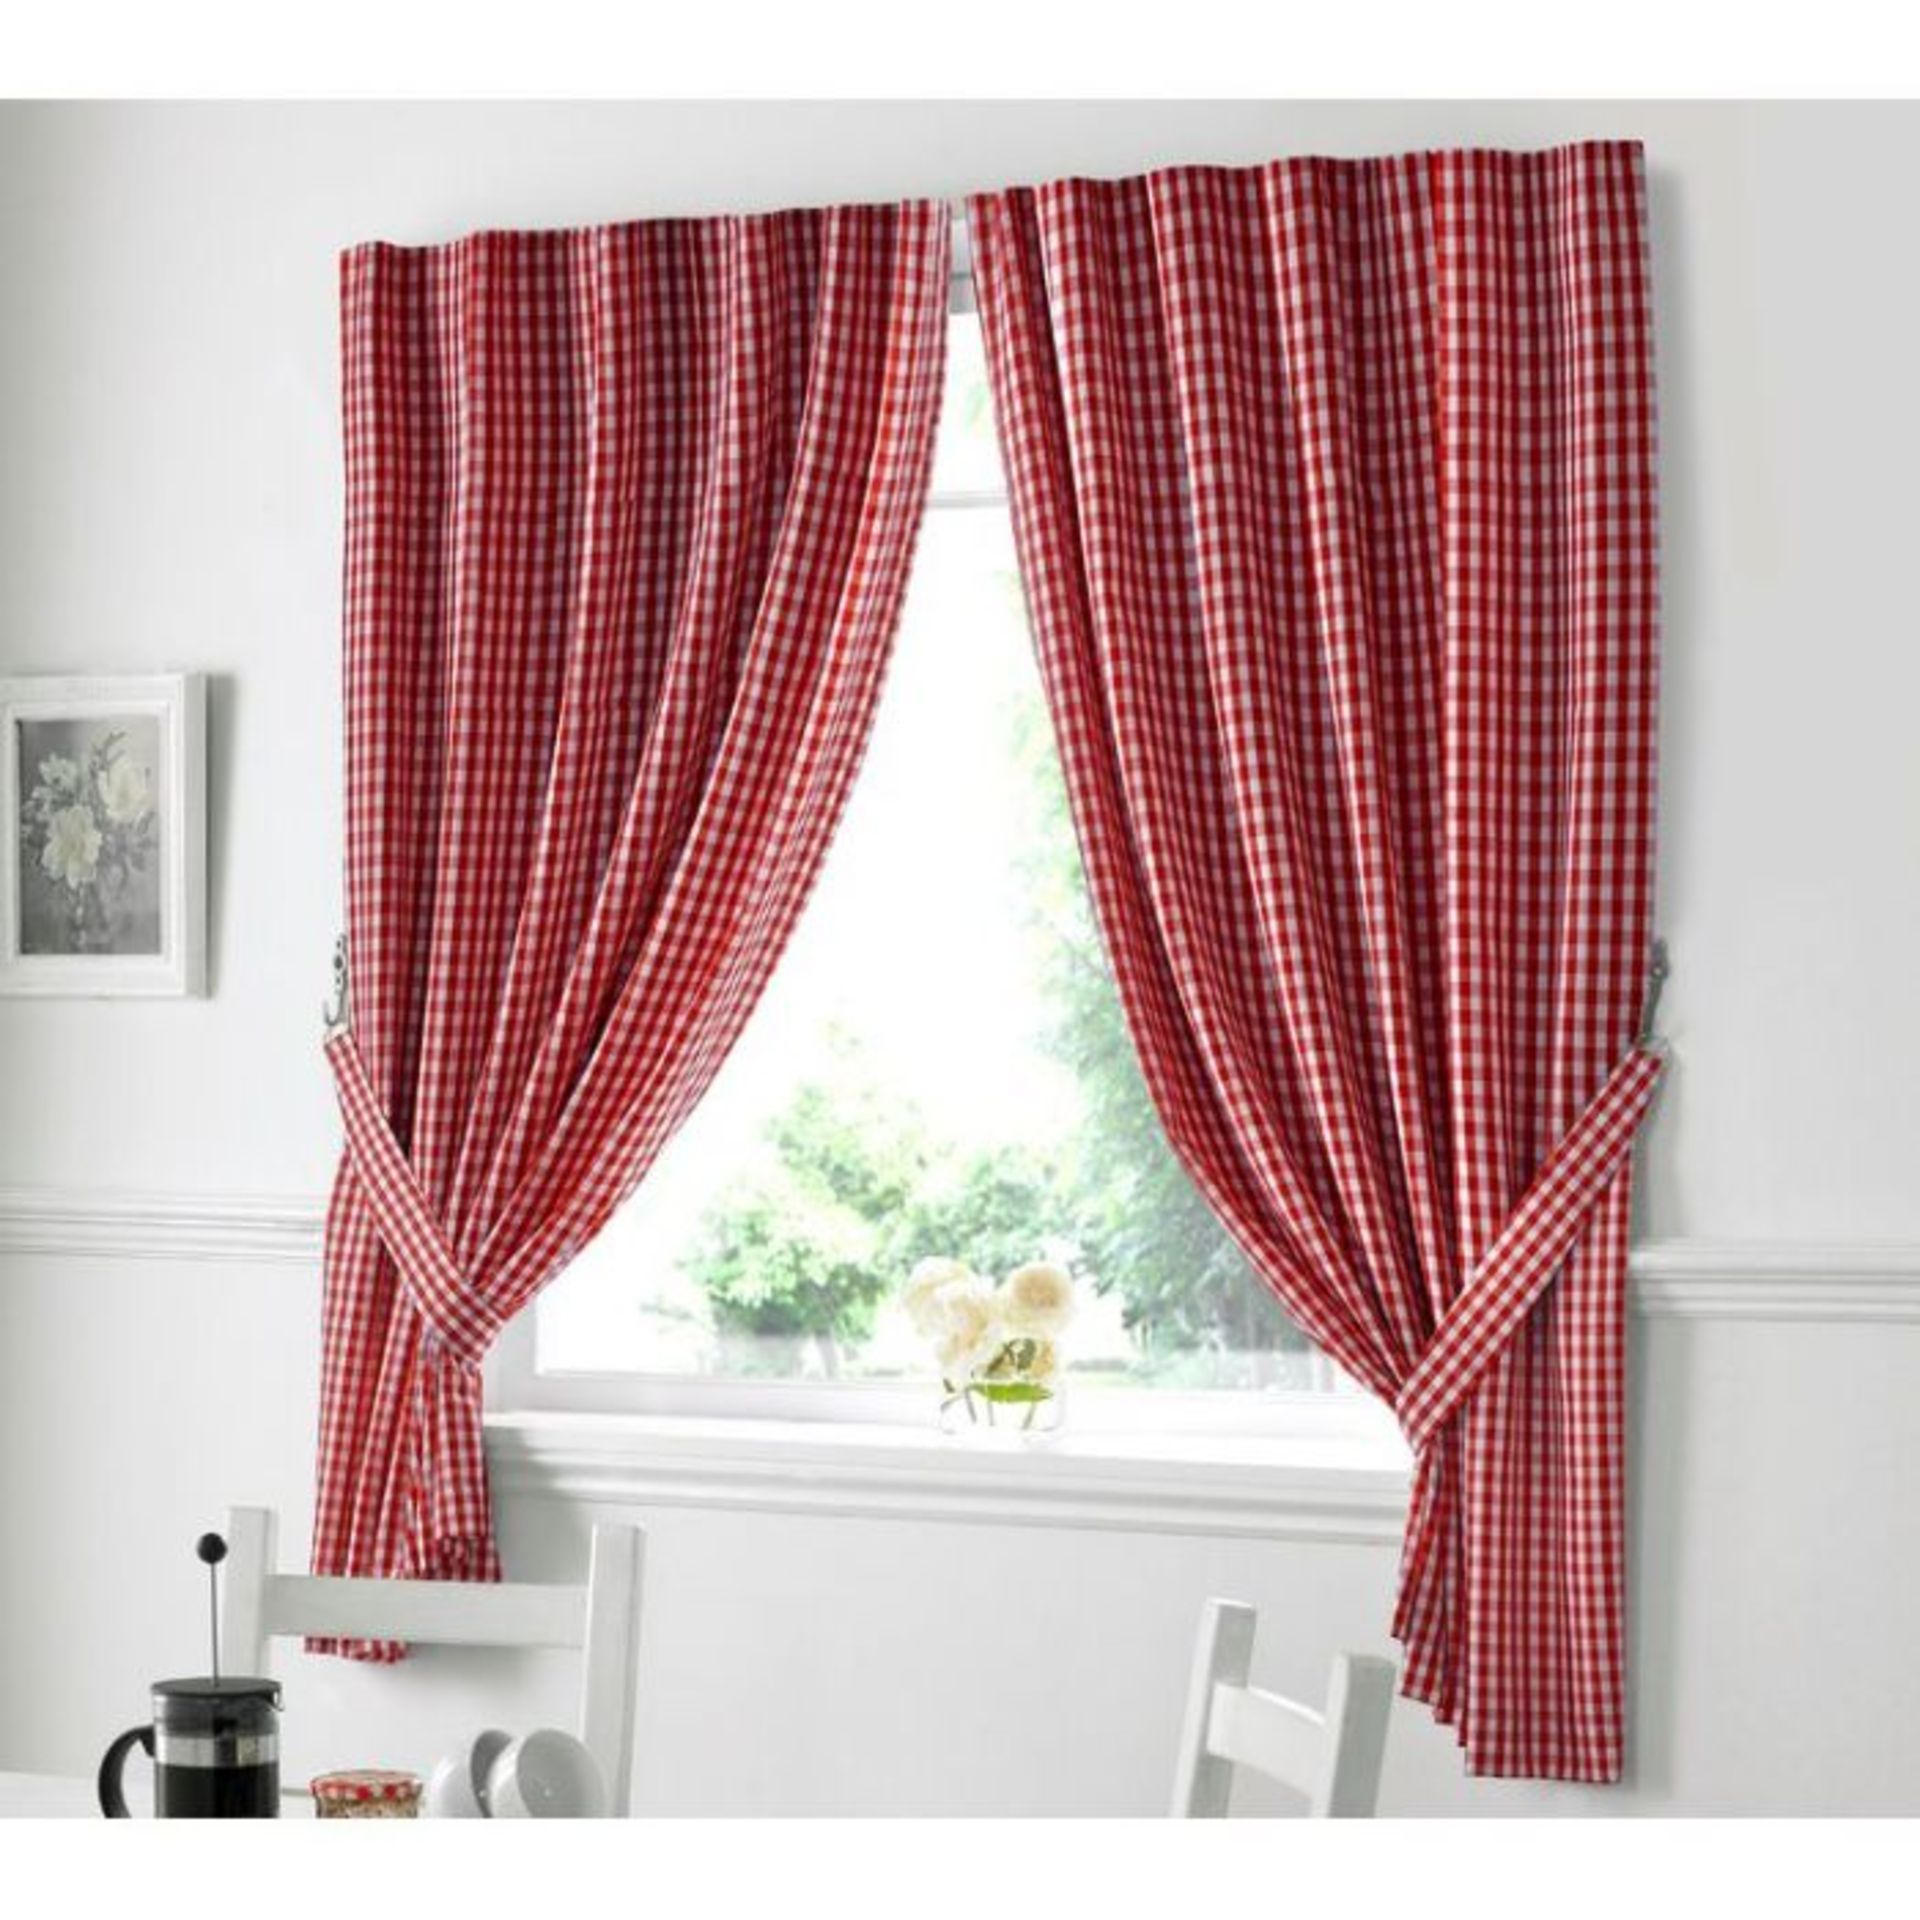 Brambly Cottage, RosaRio Kitchen Curtains (117cm W x 112cm L) - RRP £19.99 (ANSY1098 - 24889/76)